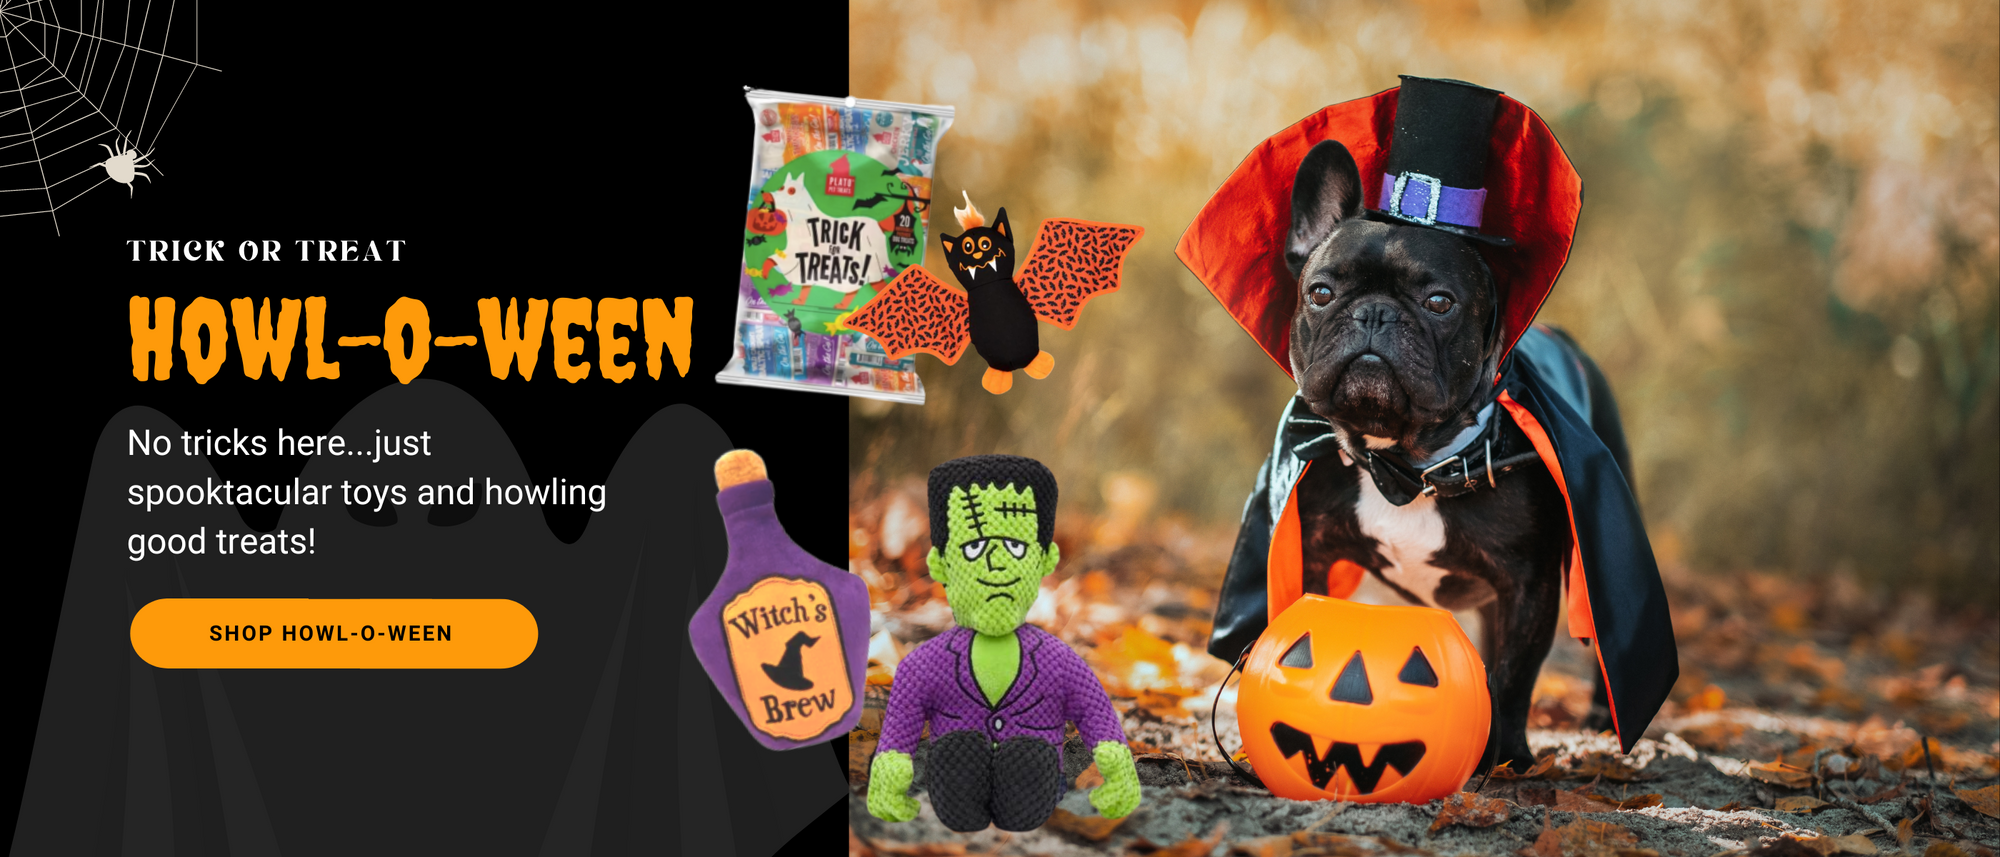 Trick or Treat! It's Howl-O-Ween! No tricks here...just spooktacular toys and howling good treats! Shop now!